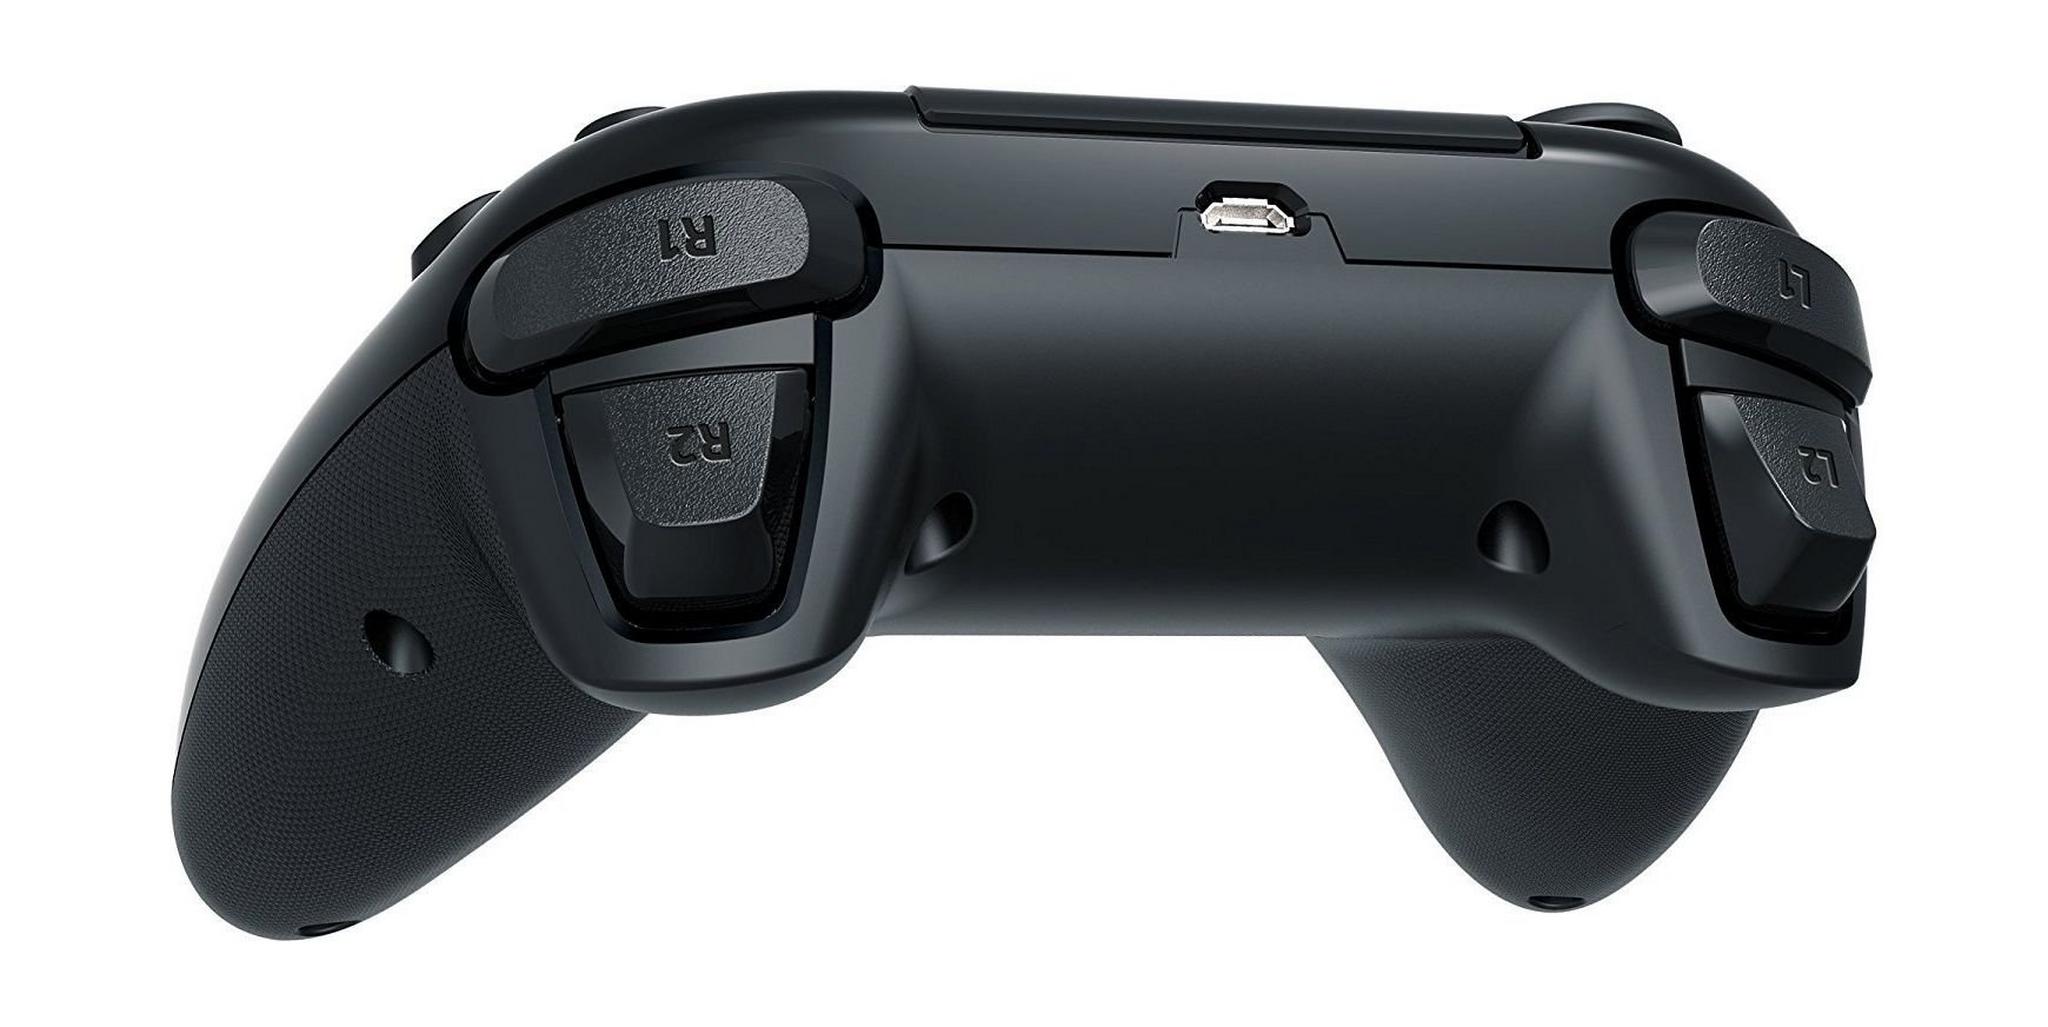 HORI Official SONY Licensed ONYX Bluetooth Wireless Controller for PlayStation 4